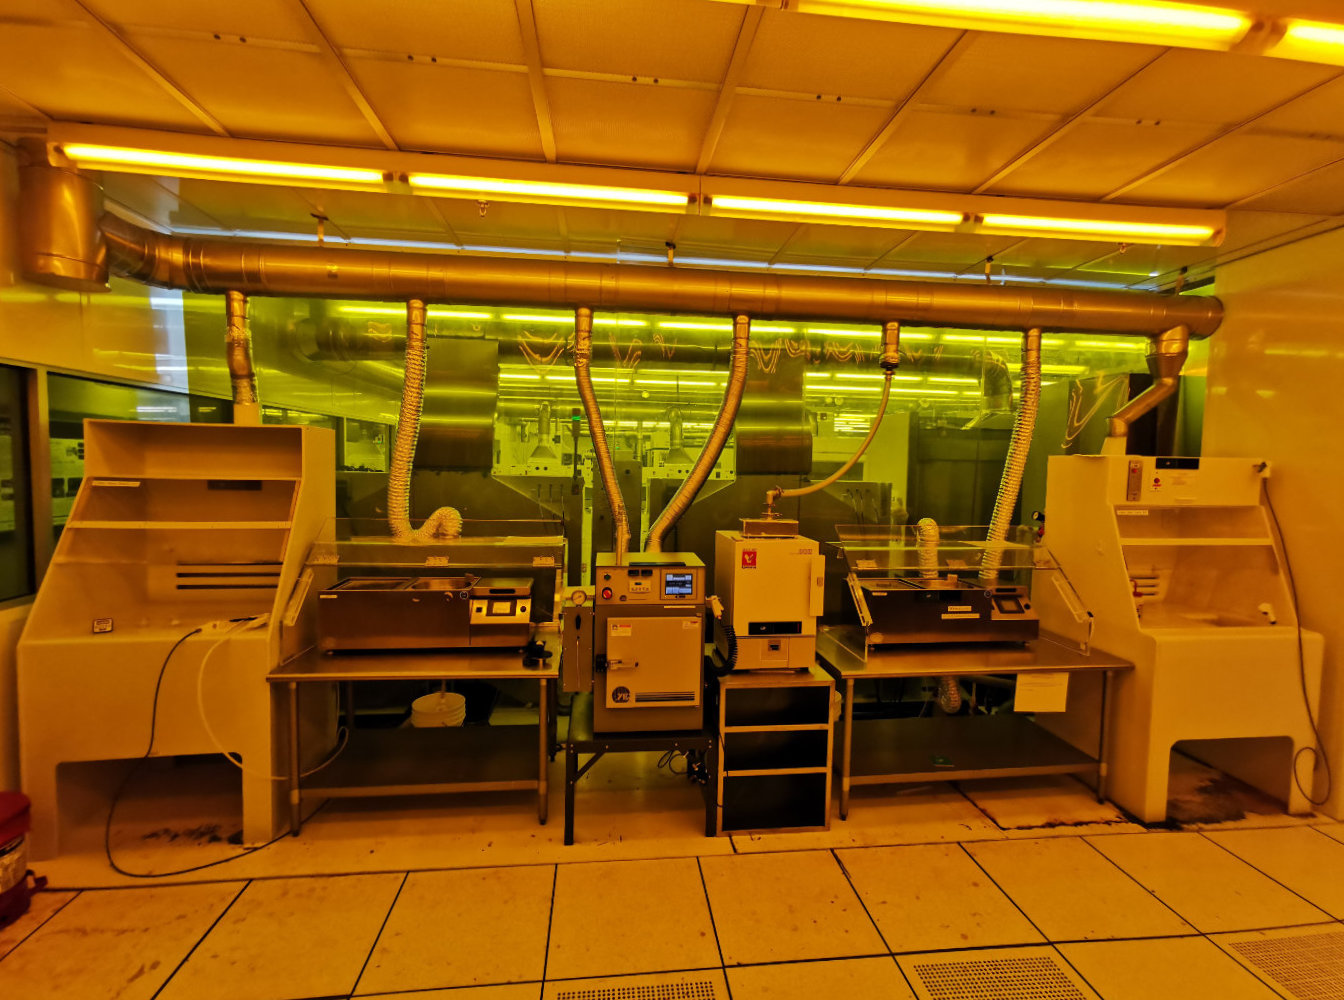 Primary litho area before upgrade